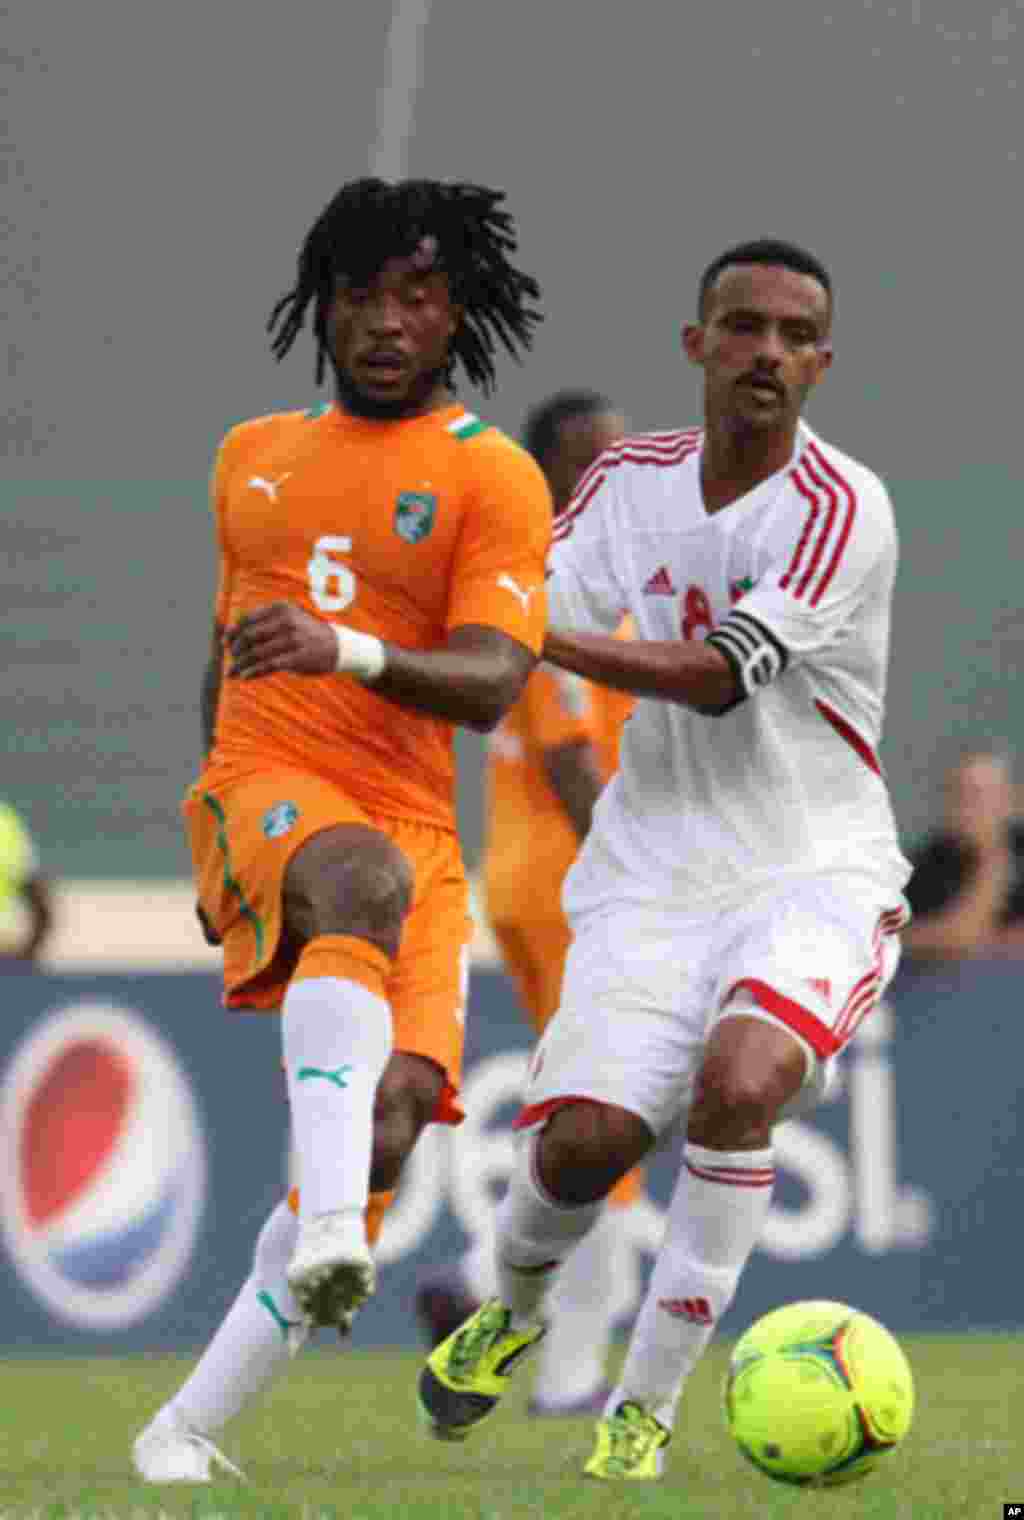 Jean-Jacques Gosso of Ivory Coast (L) fights for the ball with Hamid Nassir Nazar of Sudan during the African Nations Cup soccer tournament in Estadio de Malabo "Malabo Stadium", in Malabo January 22, 2012.